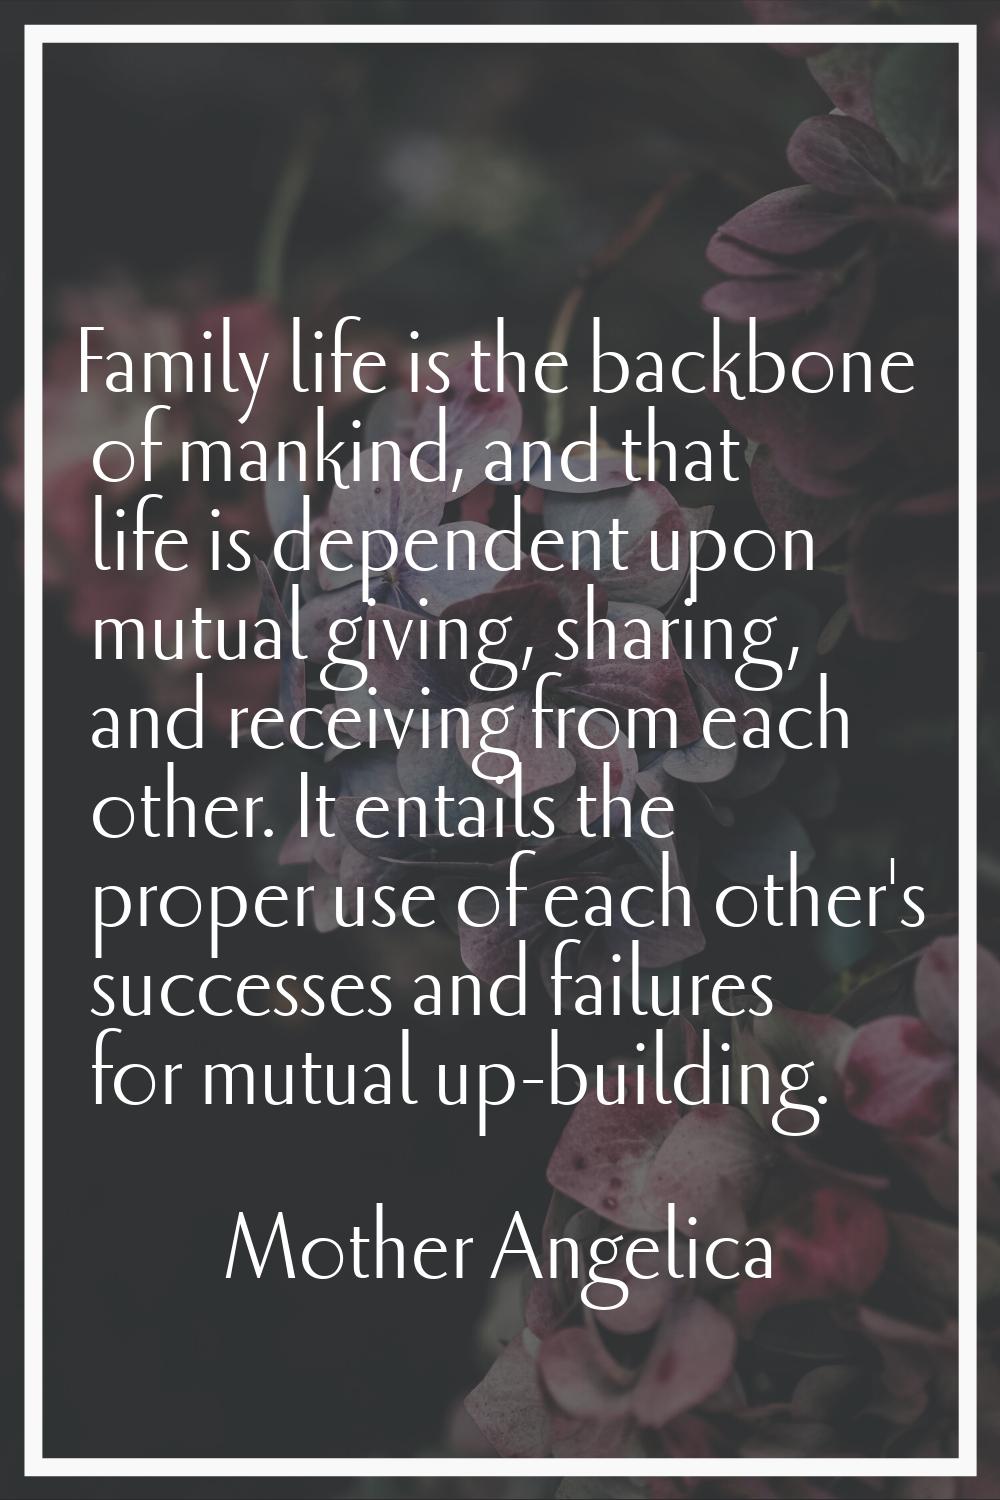 Family life is the backbone of mankind, and that life is dependent upon mutual giving, sharing, and